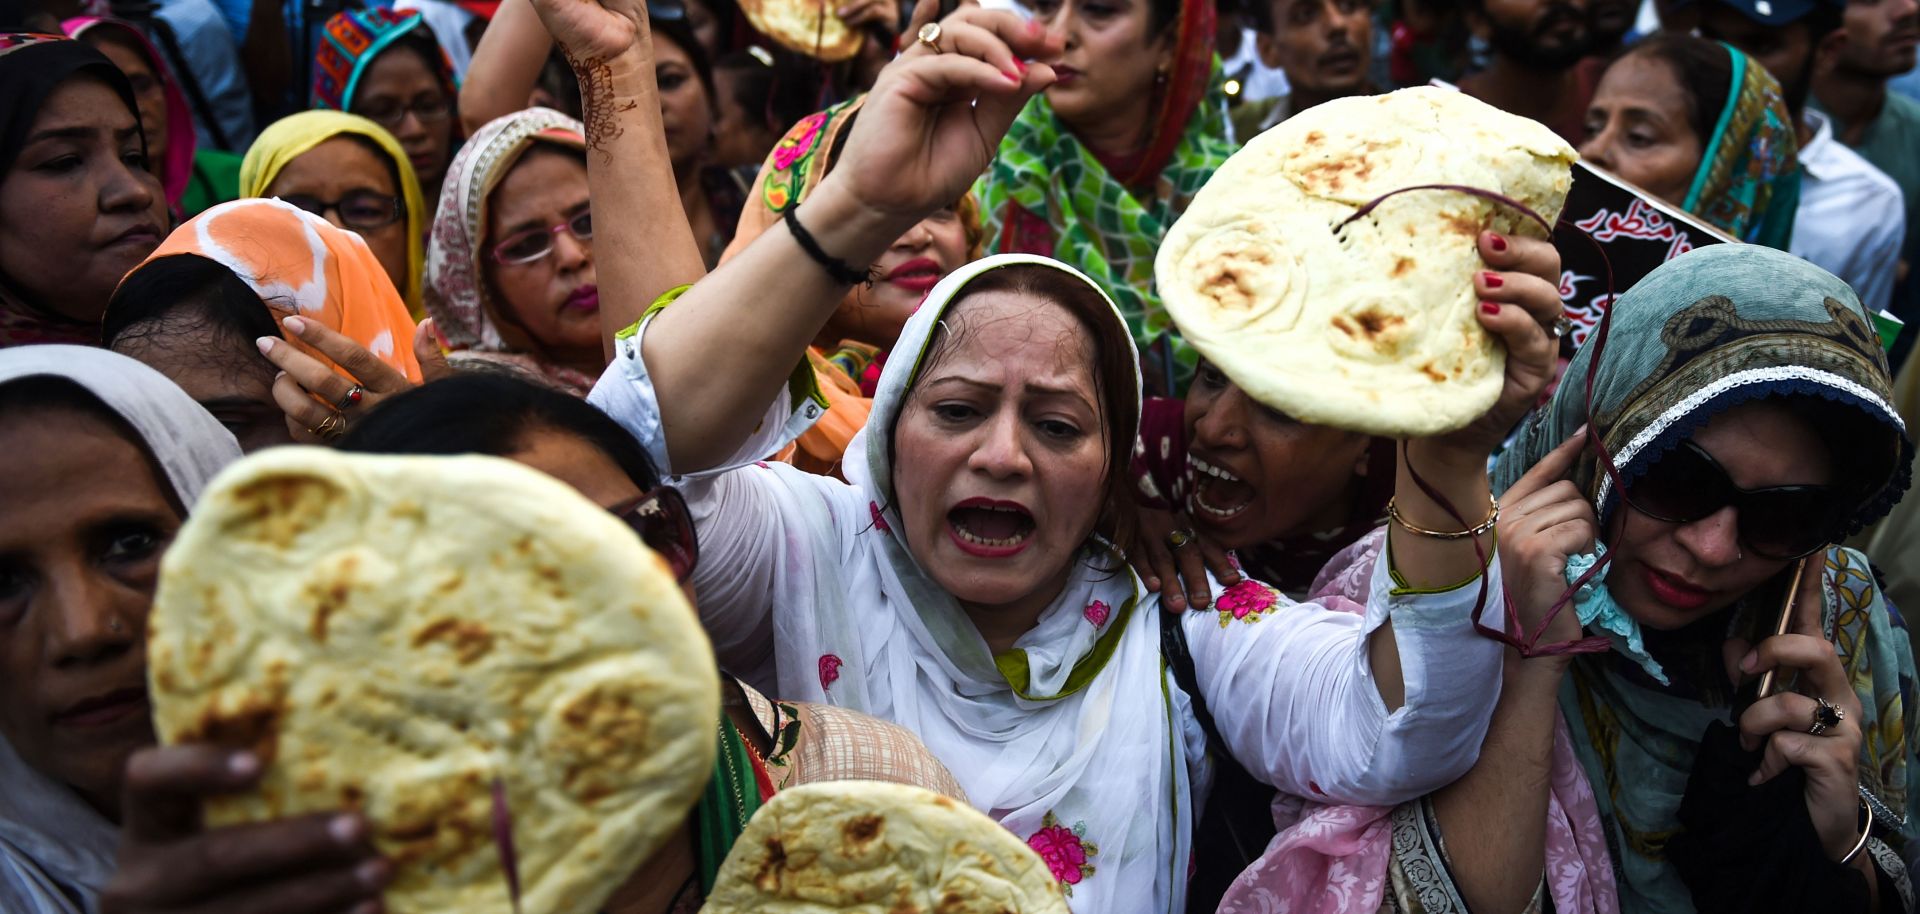 Activists from the Pakistan People's Party hold bread aloft in a protest against Prime Minister Imran Khan's government budget on June 23, 2019, in the southern city of Karachi.